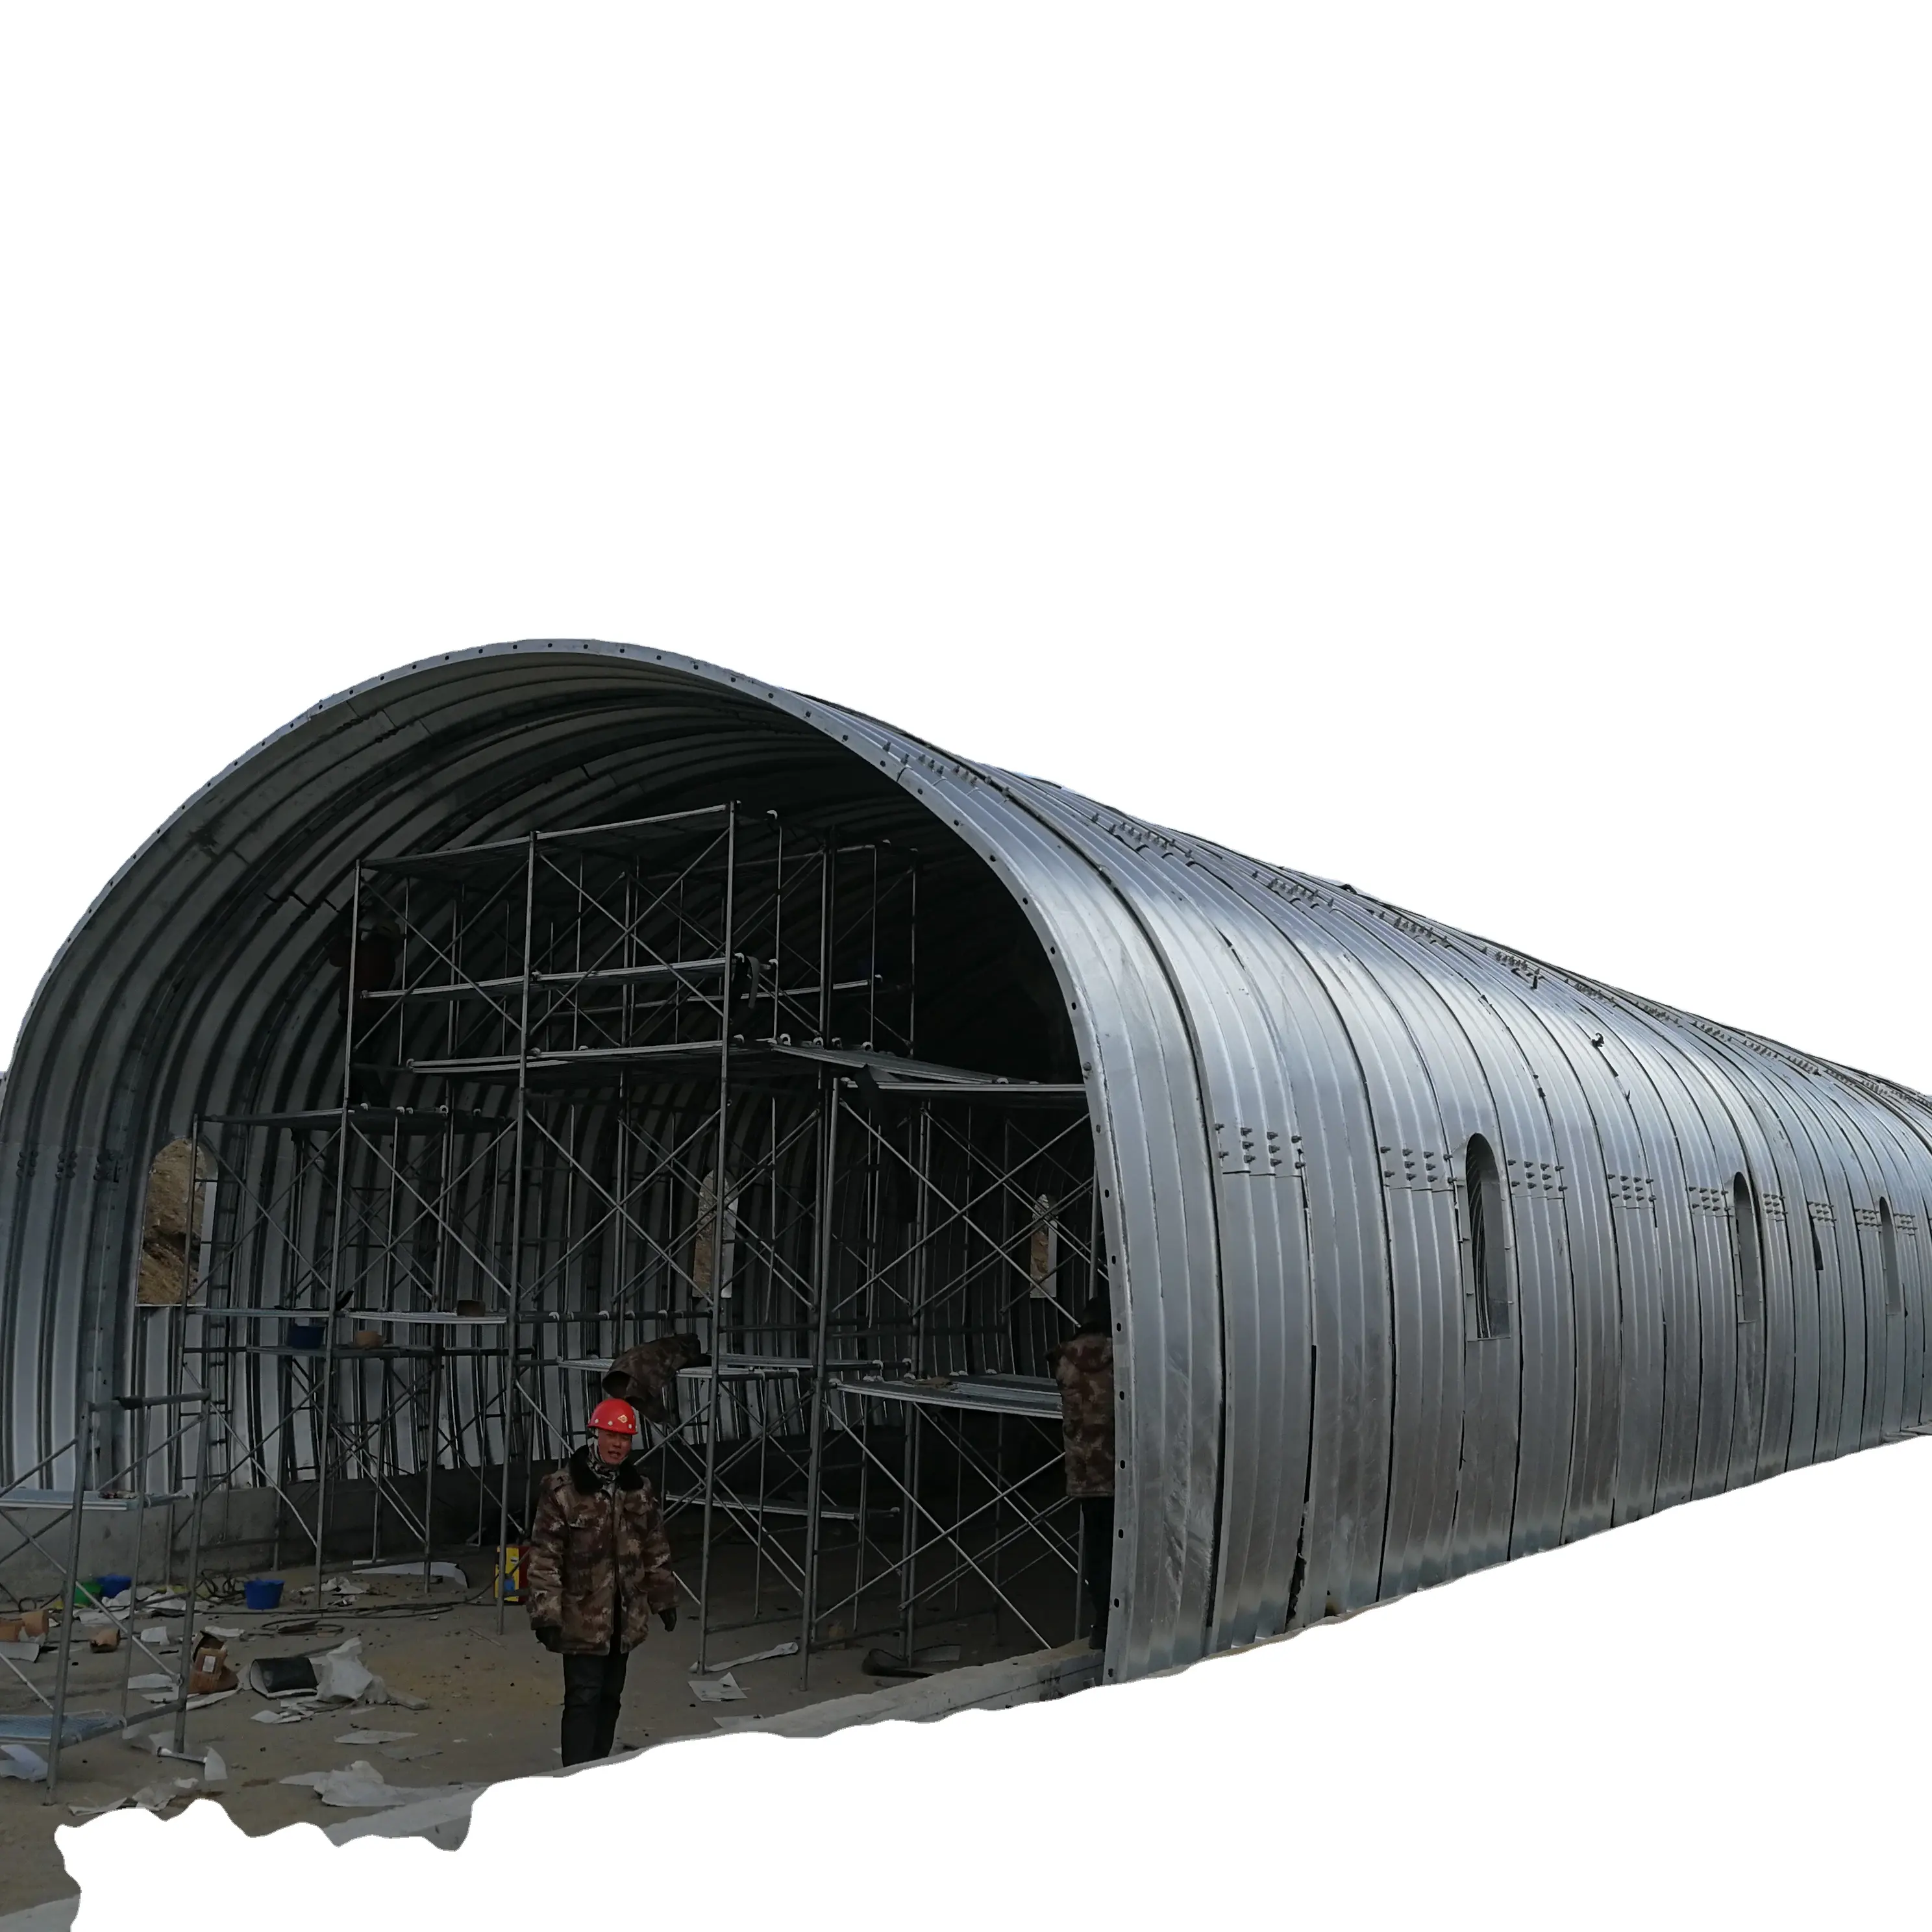 Arch-shaped Corrugated Steel Culvert Pipe for Highway Construction